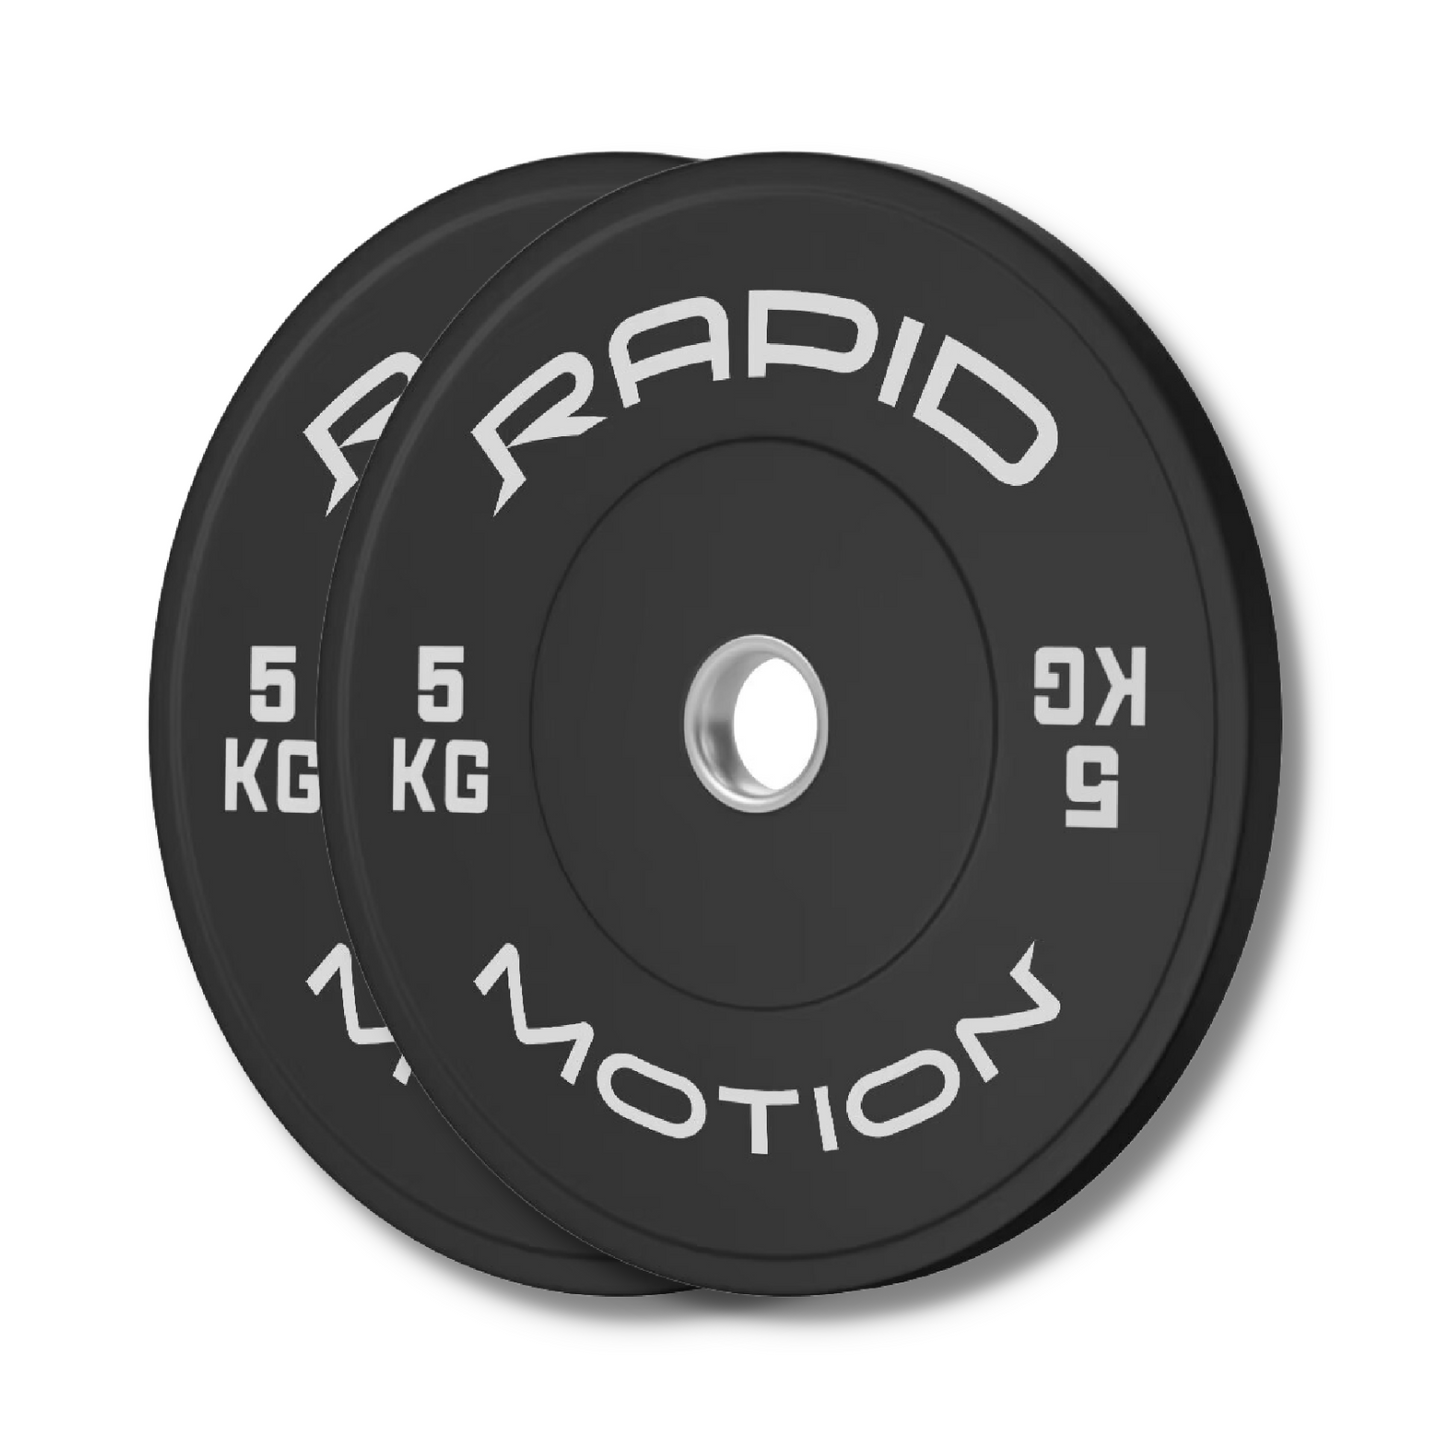 -Budget Black Bumper Plate Package-Gym Direct